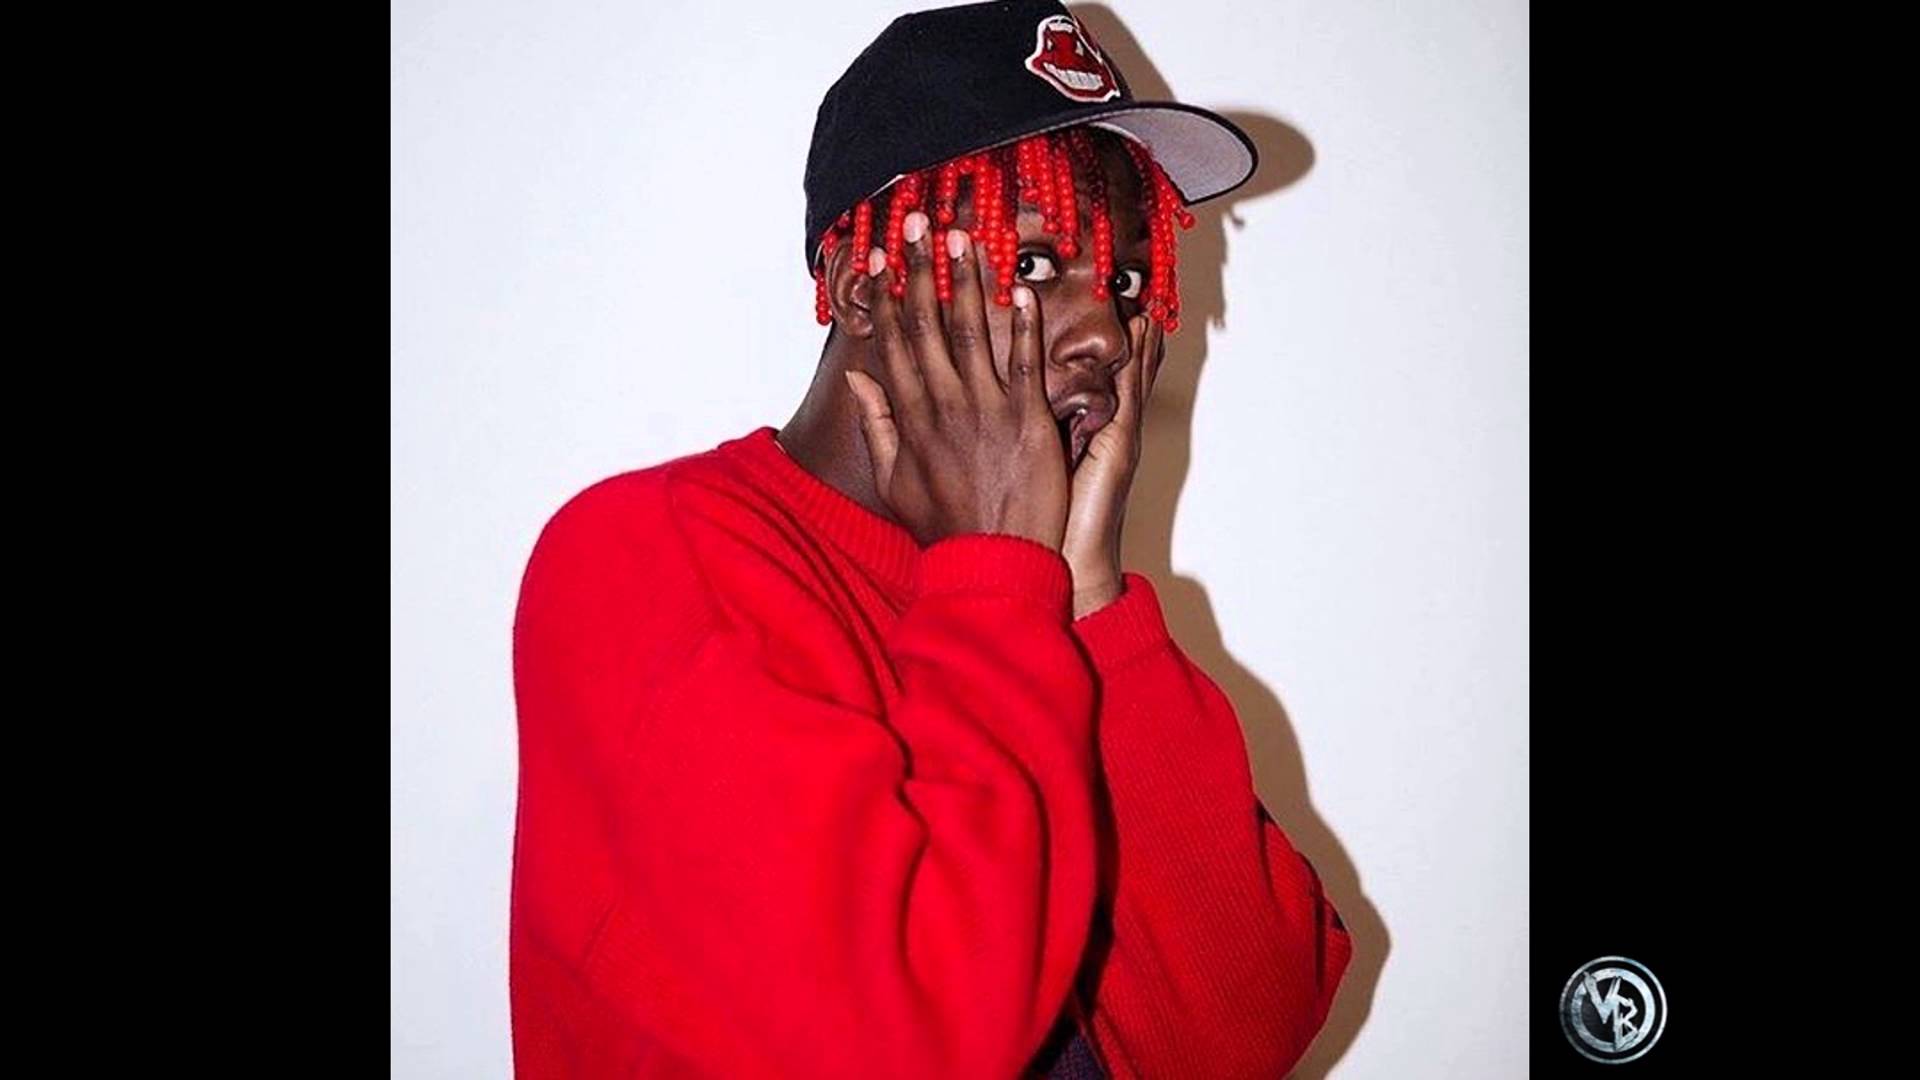 Lil Yachty Wallpapers 1920x1080